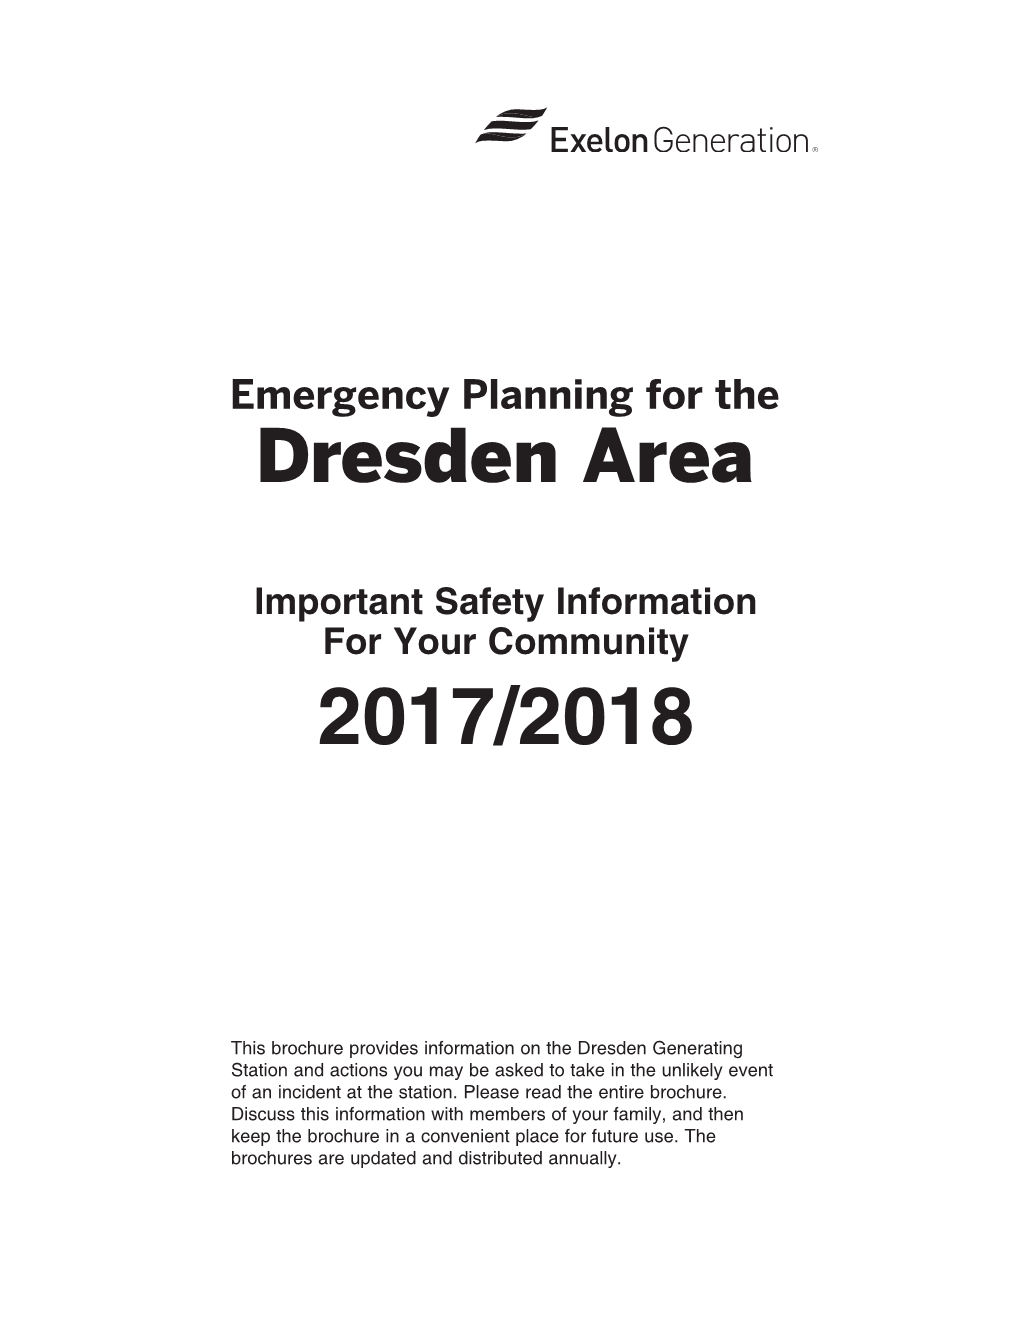 Emergency Planning for the Dresden Area